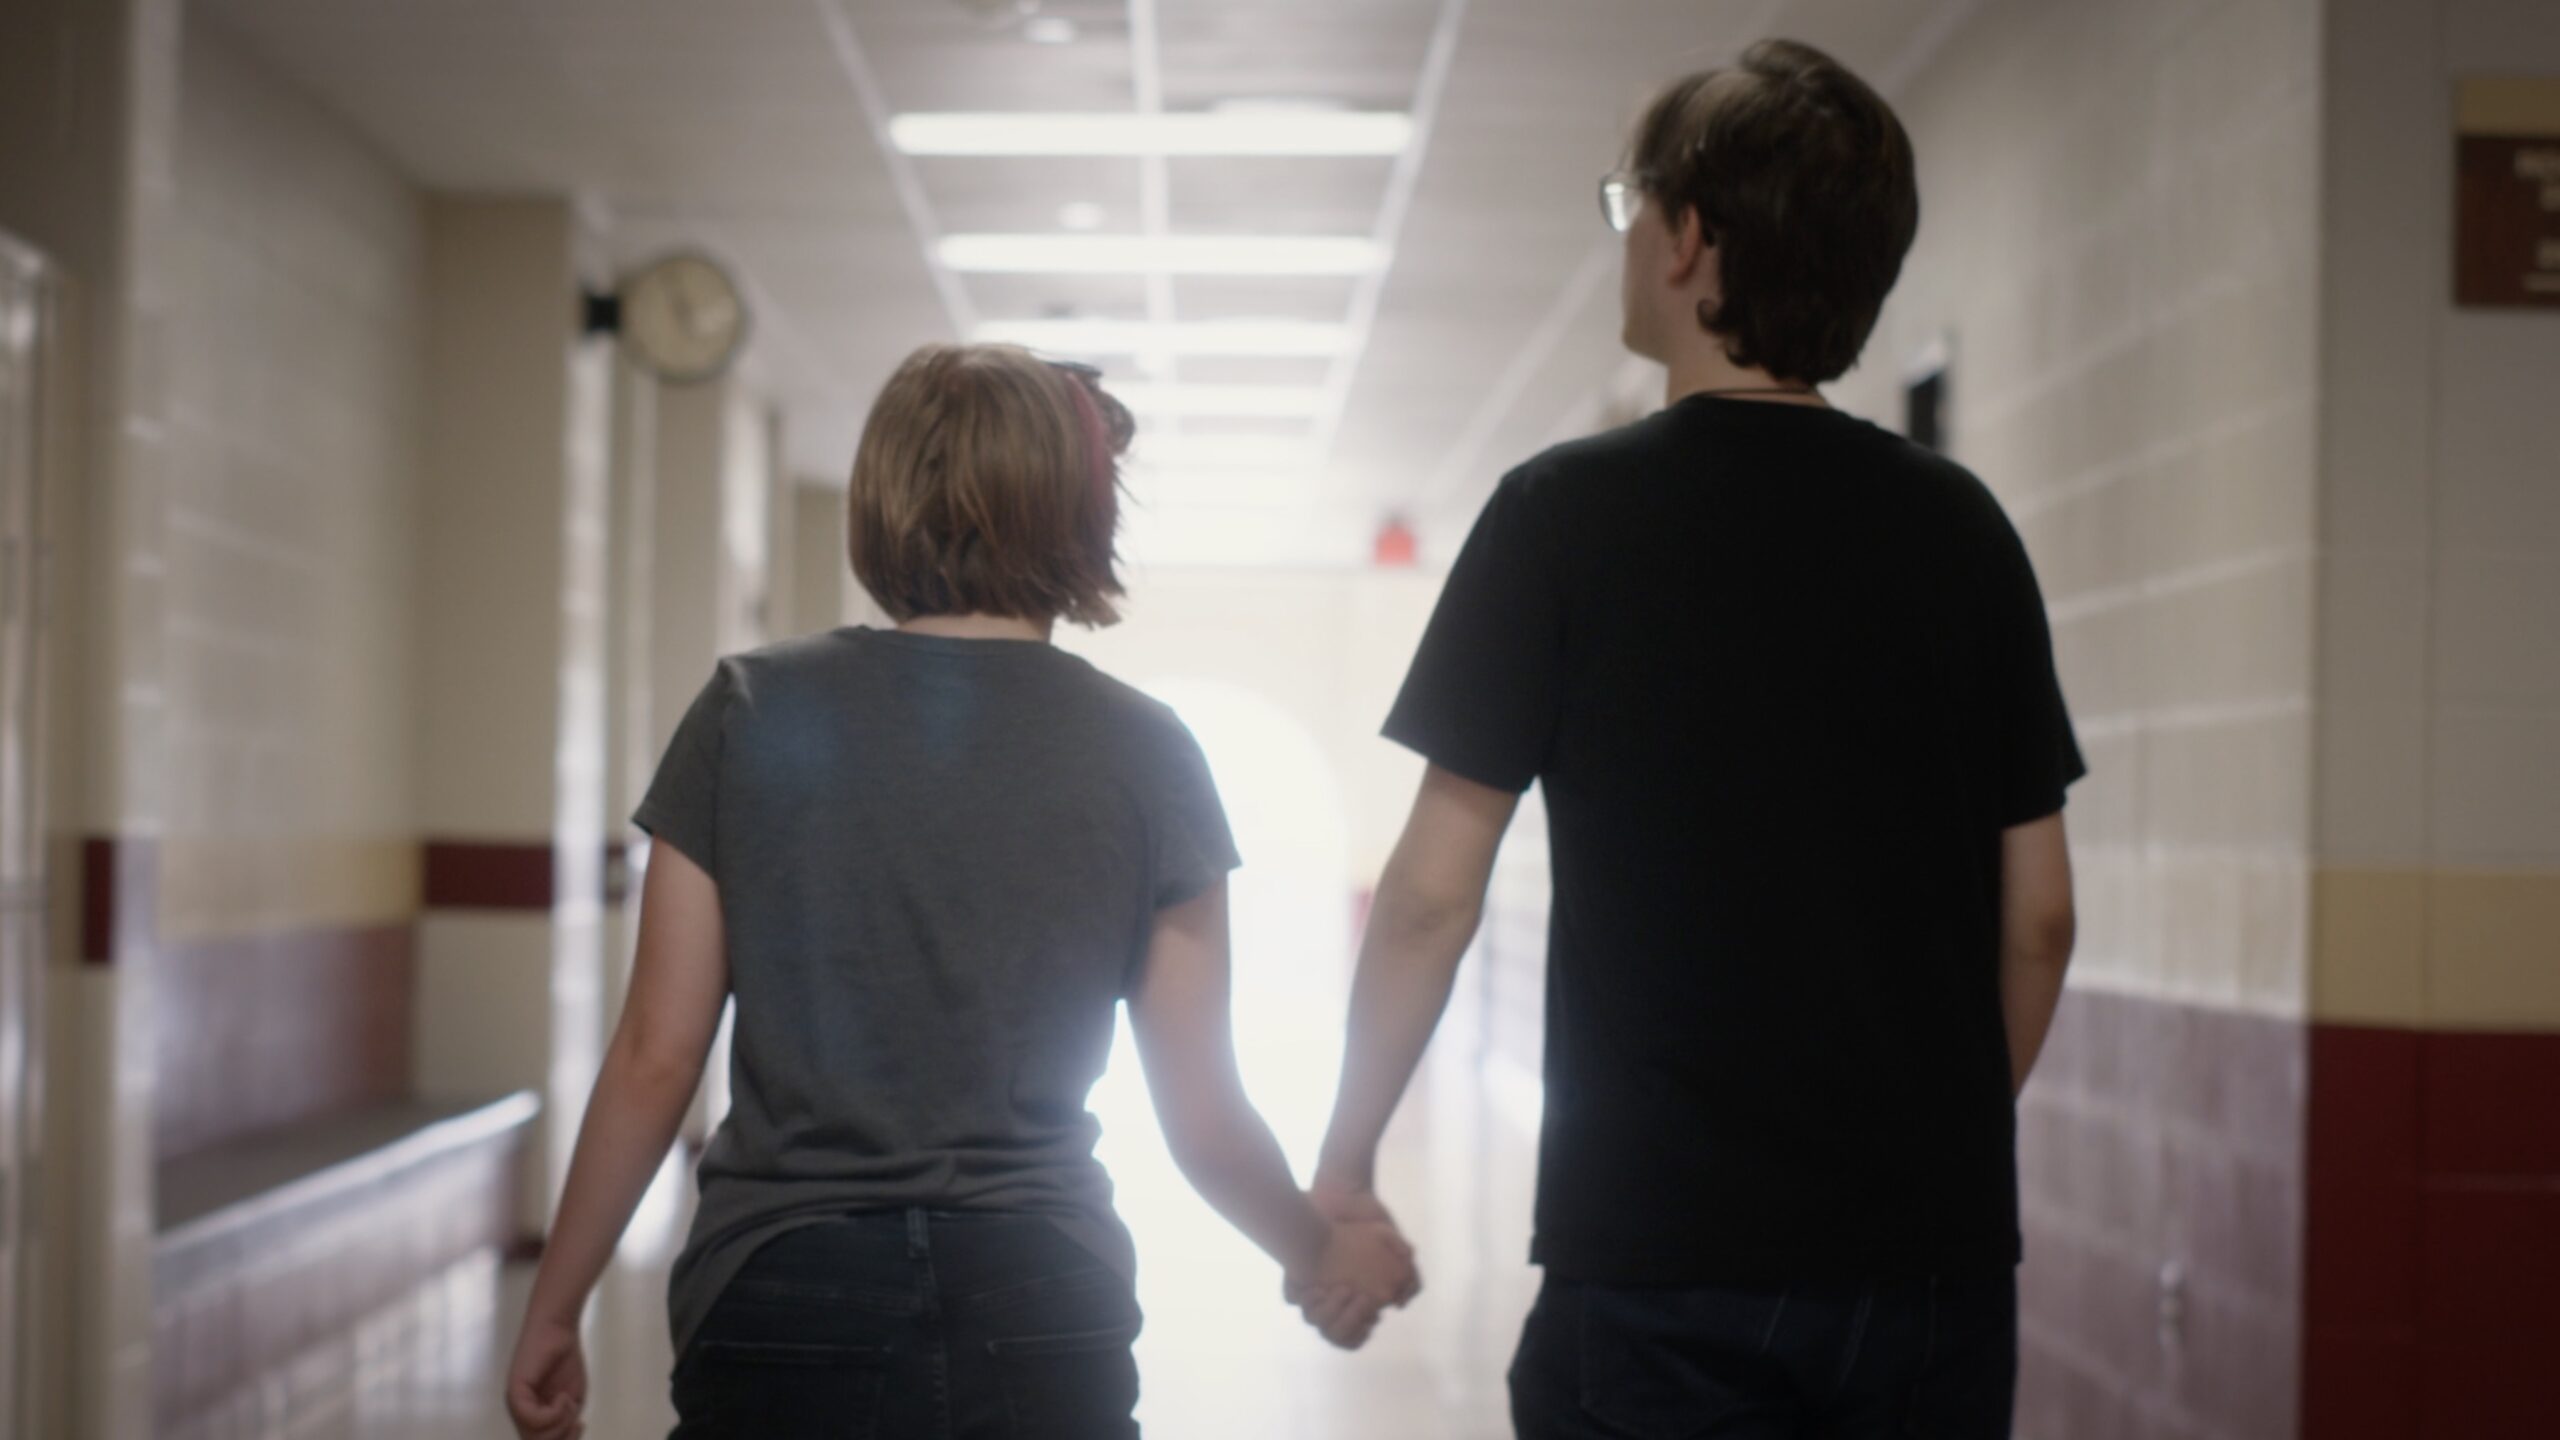 Two people holding hands walking down a hallway.